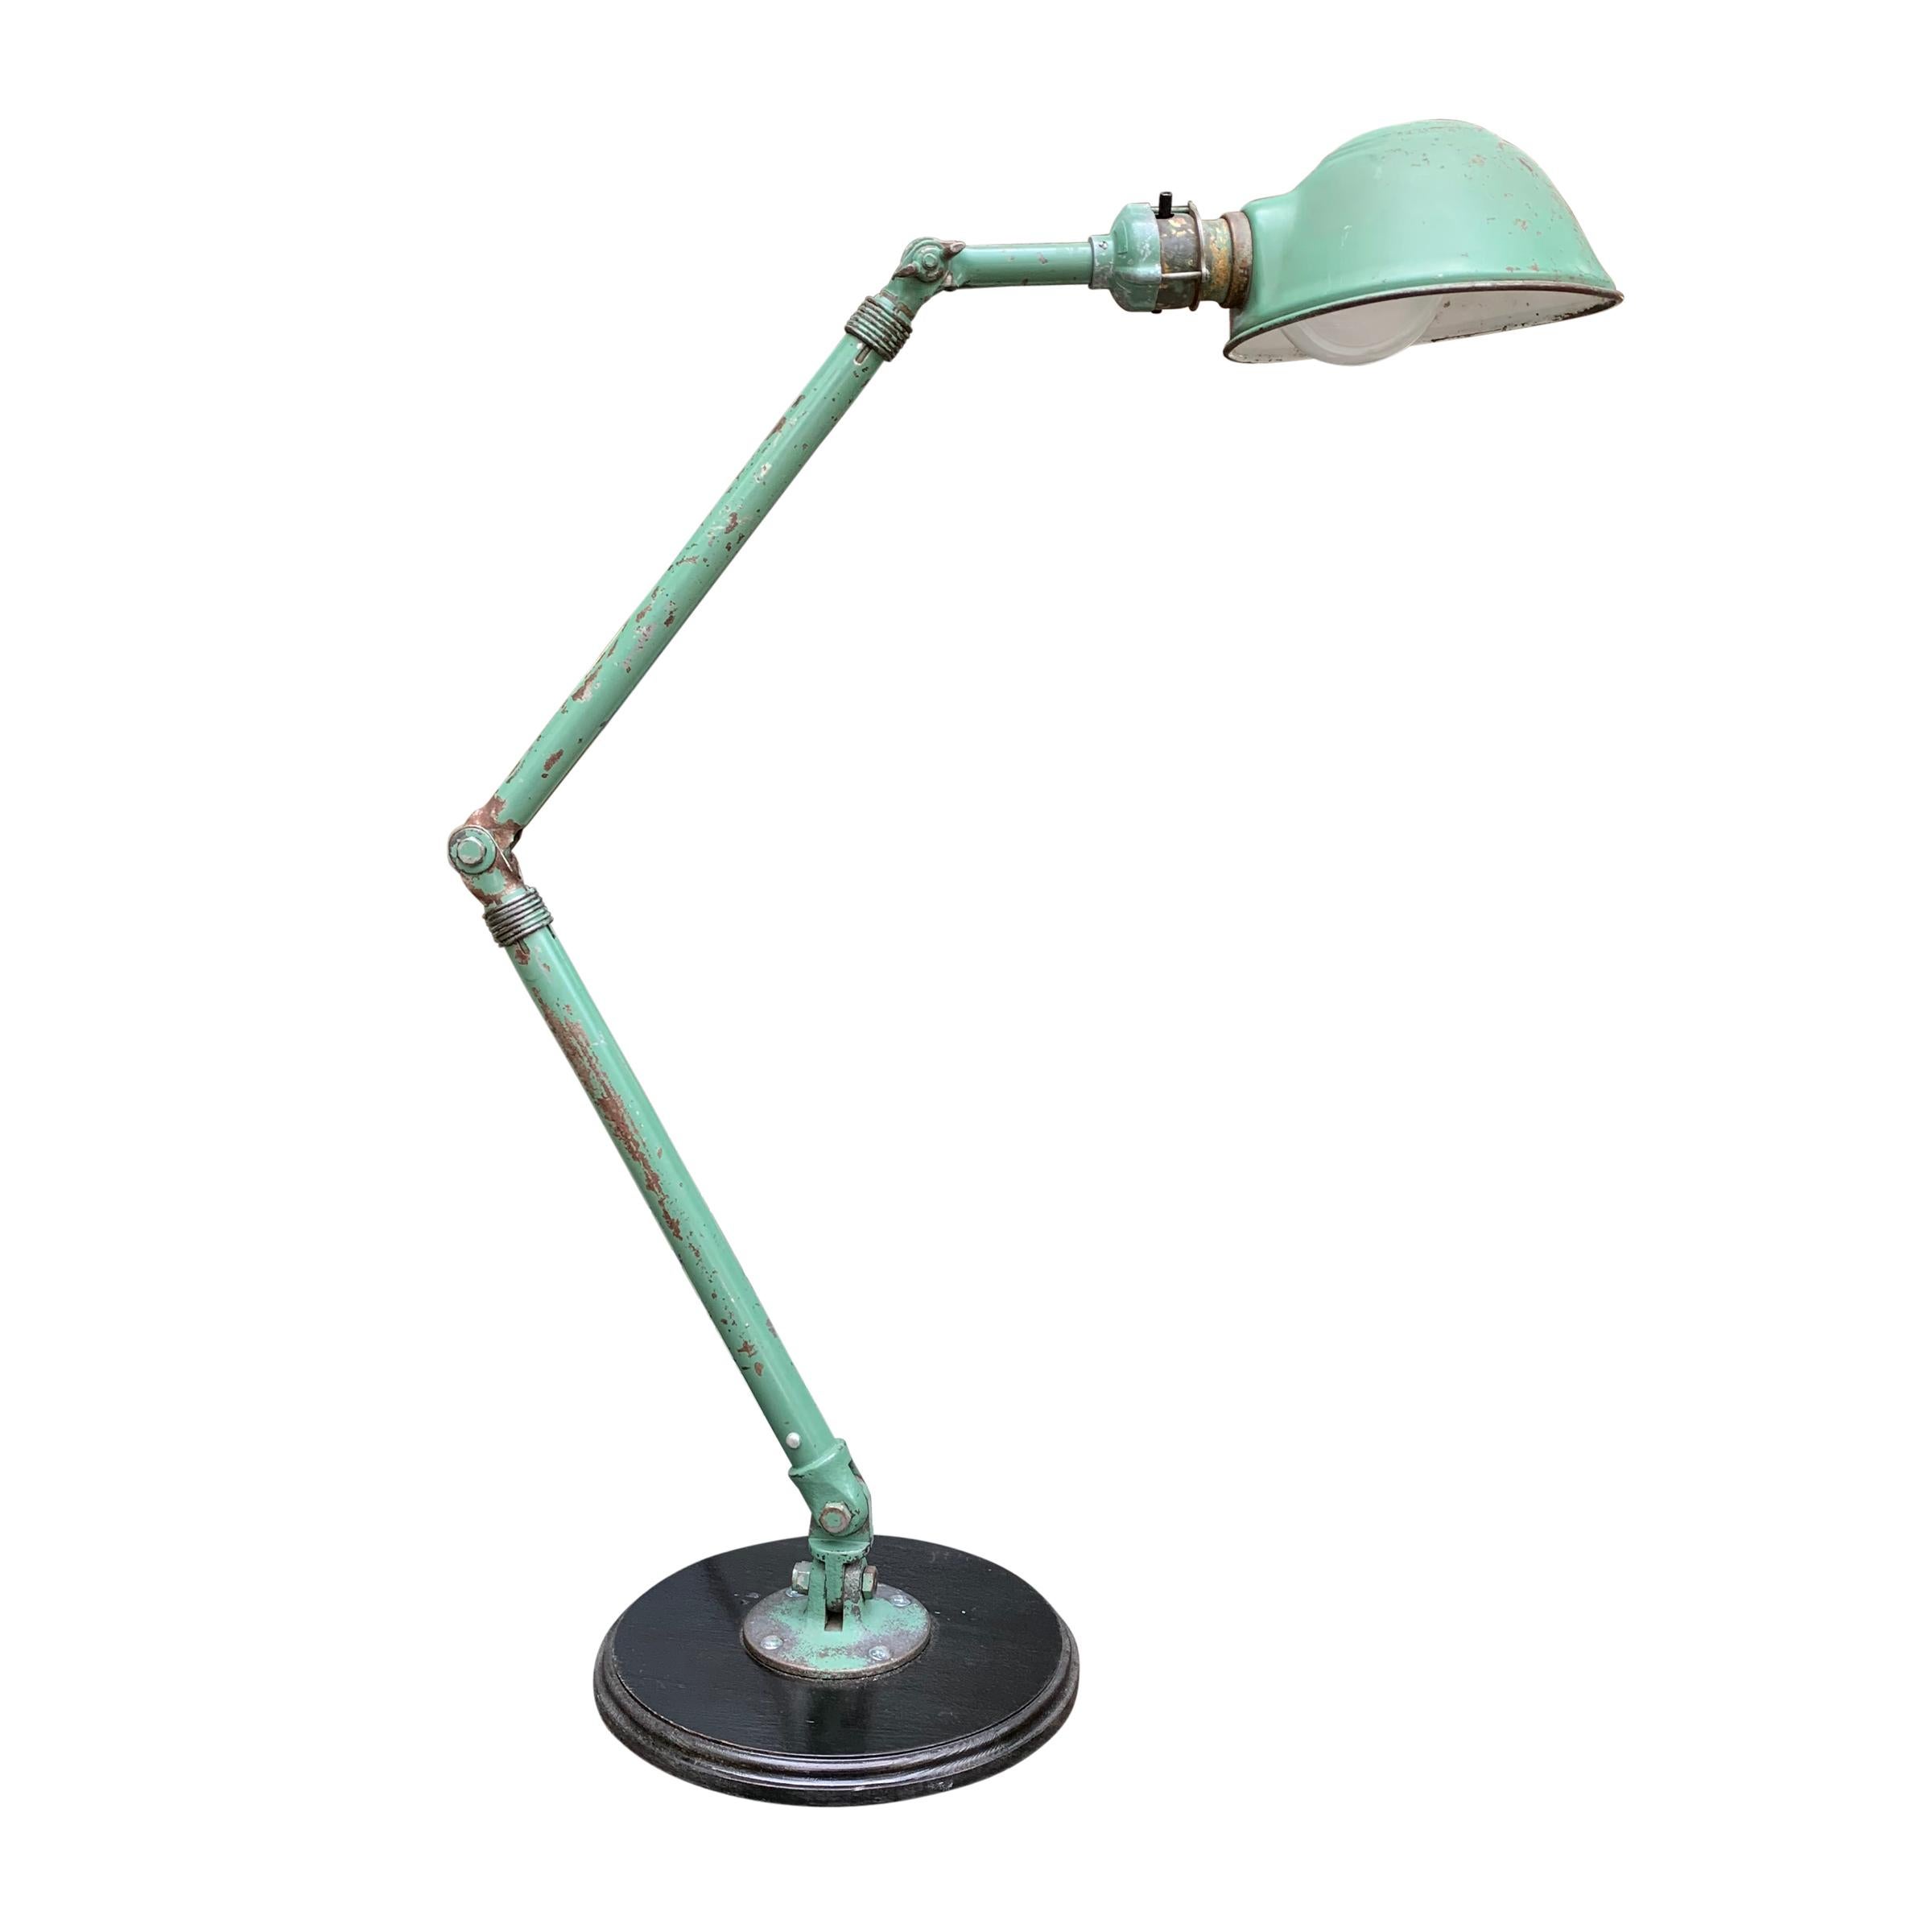 A pair of whimsical and expressive vintage American industrial steel articulated table lamps retaining their original green paint. Lamps like these were original used as task lamps in factories, but are perfect now as bedside lamps or on side tables